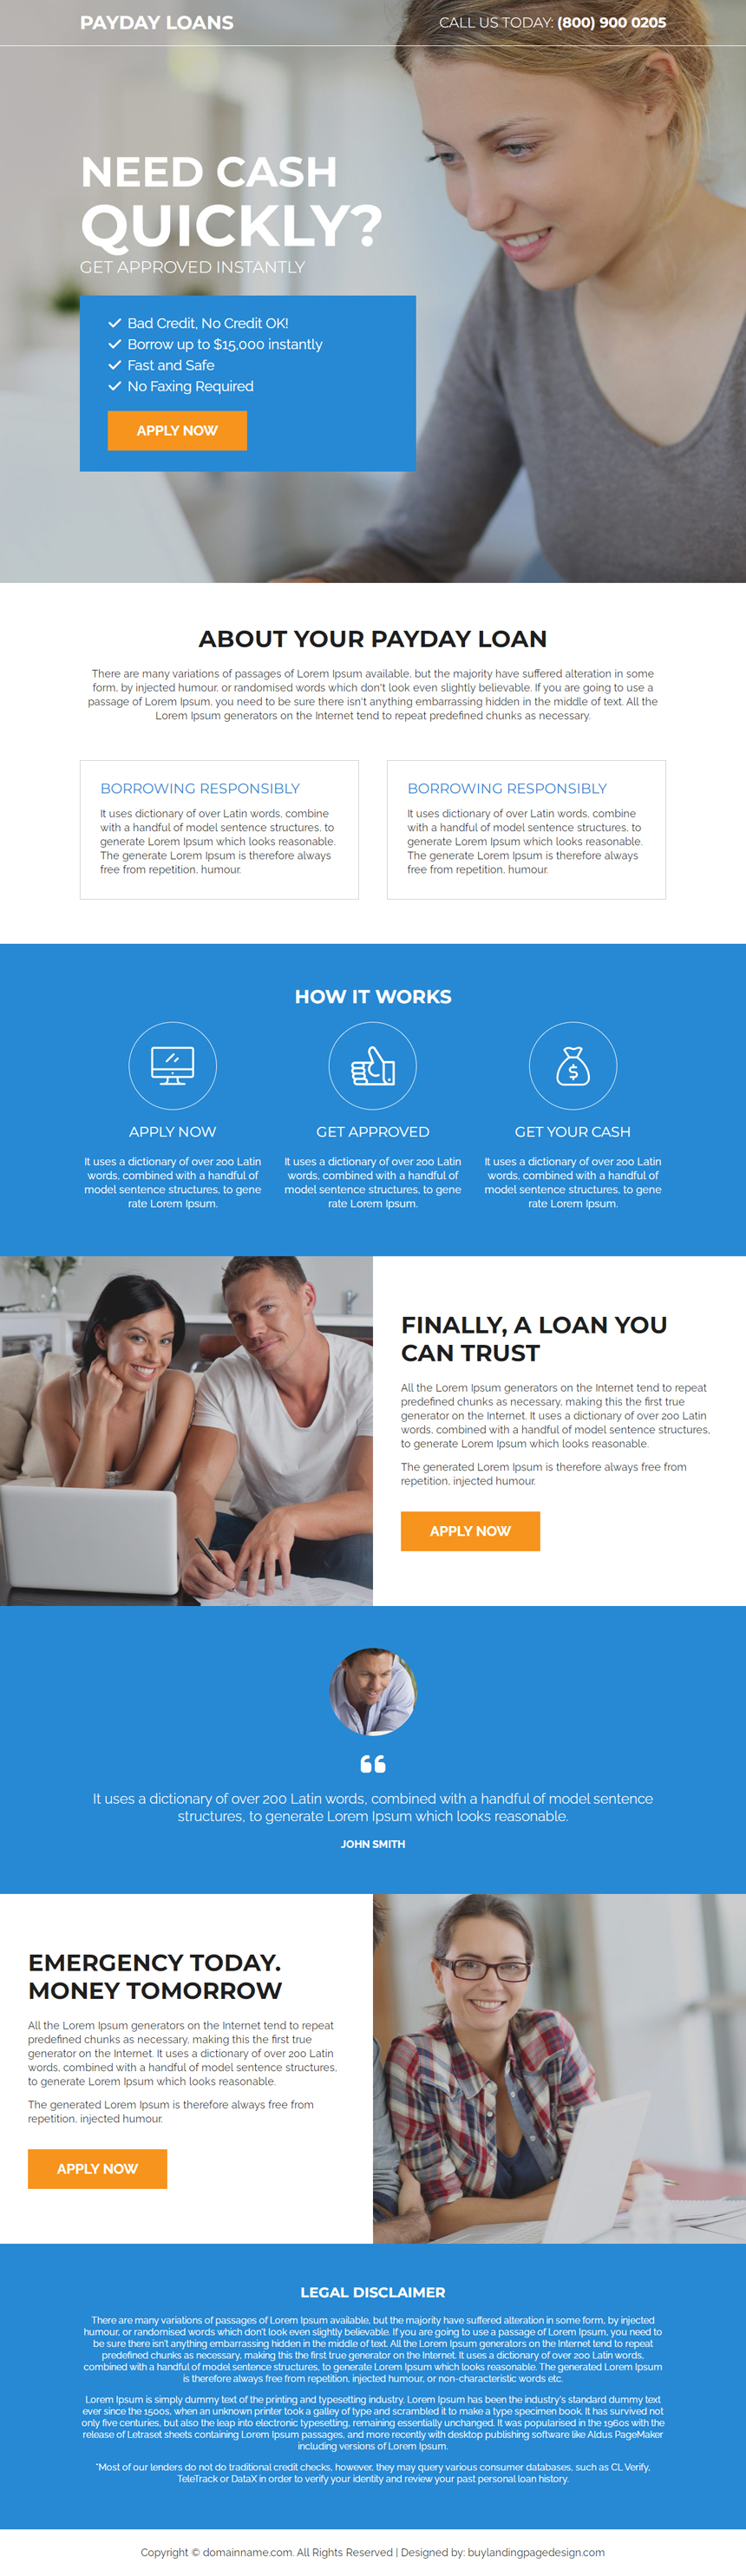 quick payday cash loan responsive landing page